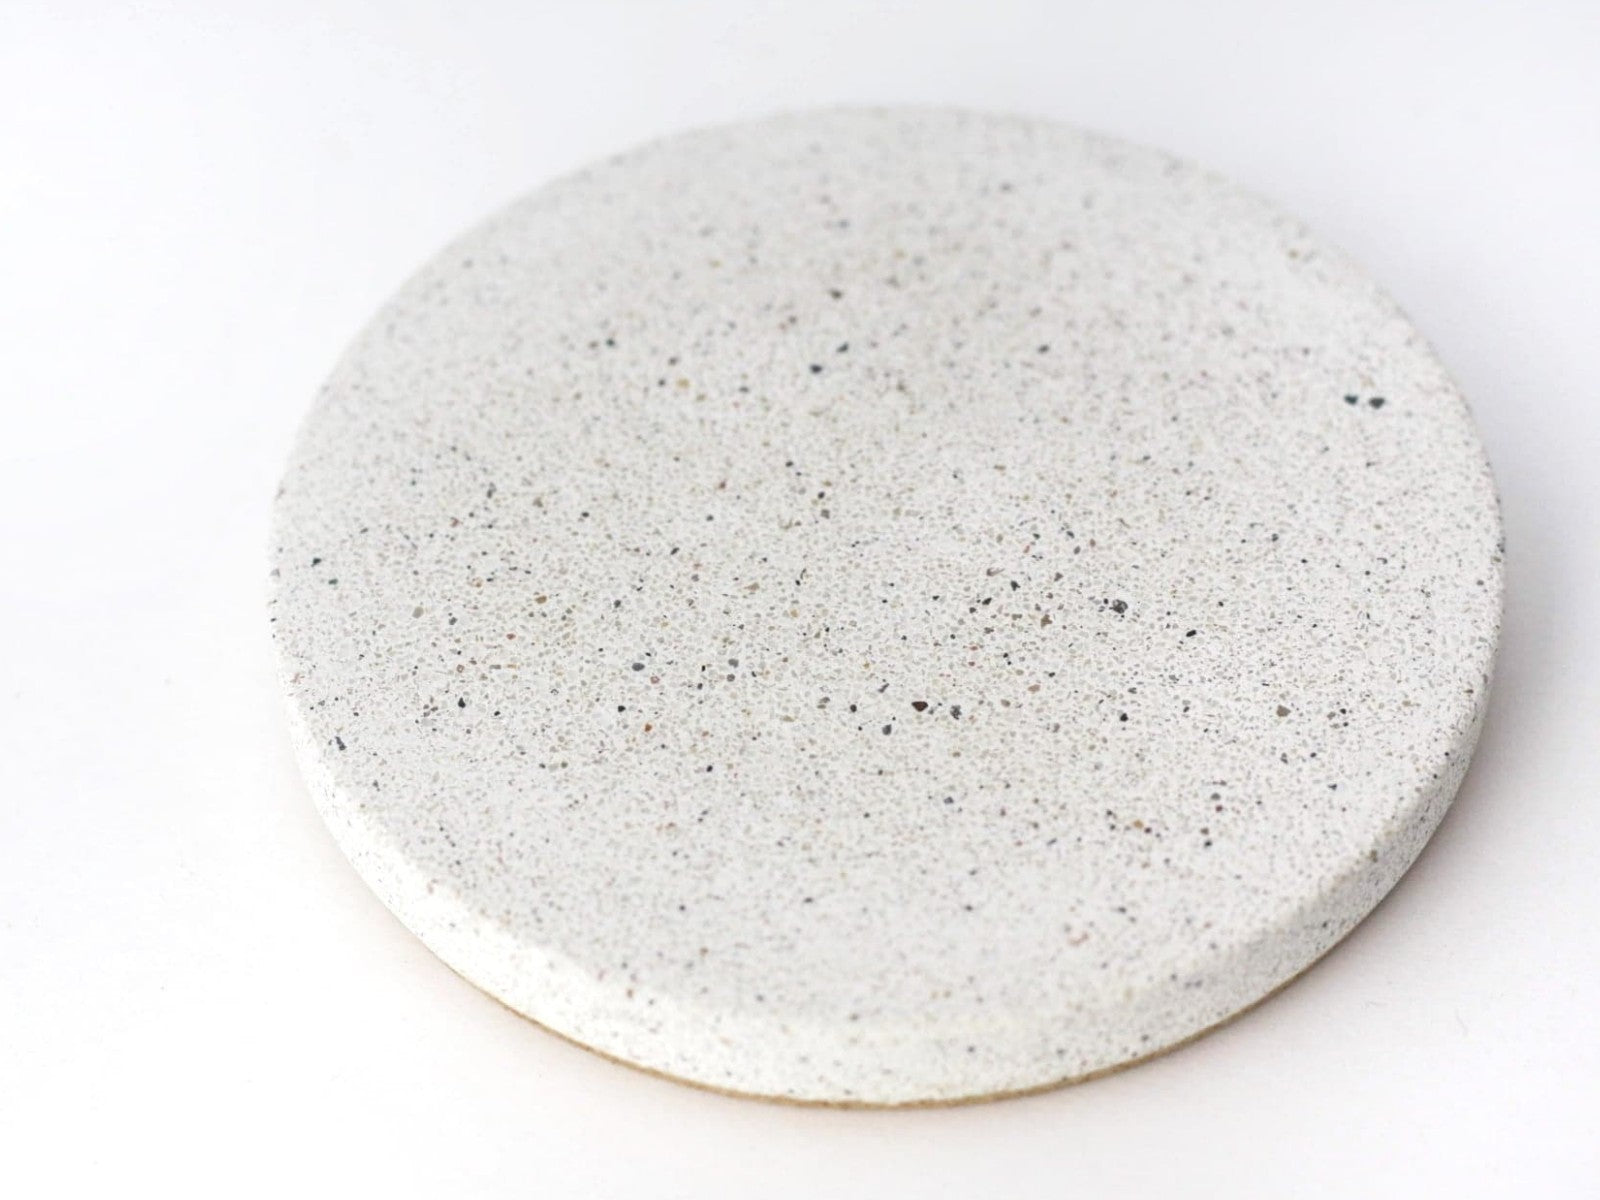 Close-up view of a sparkling white sandstone round coaster, elegant and durable design detail